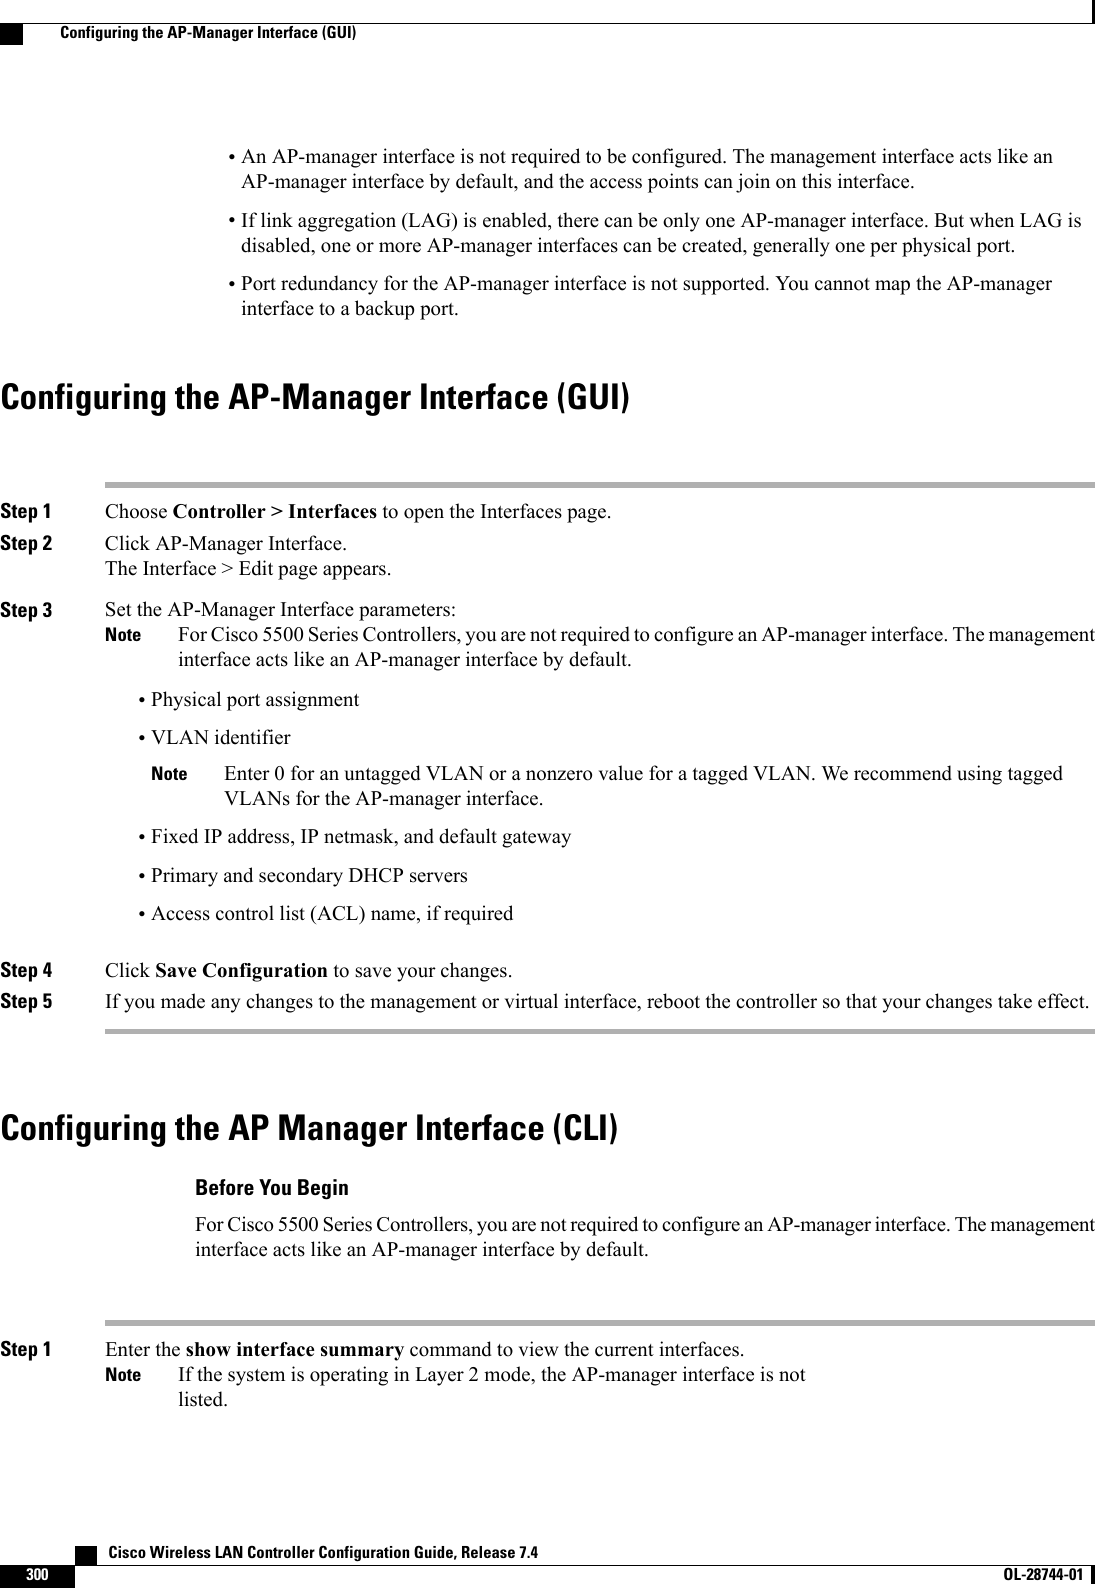 •An AP-manager interface is not required to be configured. The management interface acts like anAP-manager interface by default, and the access points can join on this interface.•If link aggregation (LAG) is enabled, there can be only one AP-manager interface. But when LAG isdisabled, one or more AP-manager interfaces can be created, generally one per physical port.•Port redundancy for the AP-manager interface is not supported. You cannot map the AP-managerinterface to a backup port.Configuring the AP-Manager Interface (GUI)Step 1 Choose Controller &gt; Interfaces to open the Interfaces page.Step 2 Click AP-Manager Interface.The Interface &gt; Edit page appears.Step 3 Set the AP-Manager Interface parameters:For Cisco 5500 Series Controllers, you are not required to configure an AP-manager interface. The managementinterface acts like an AP-manager interface by default.Note•Physical port assignment•VLAN identifierEnter 0 for an untagged VLAN or a nonzero value for a tagged VLAN. We recommend using taggedVLANs for the AP-manager interface.Note•Fixed IP address, IP netmask, and default gateway•Primary and secondary DHCP servers•Access control list (ACL) name, if requiredStep 4 Click Save Configuration to save your changes.Step 5 If you made any changes to the management or virtual interface, reboot the controller so that your changes take effect.Configuring the AP Manager Interface (CLI)Before You BeginFor Cisco 5500 Series Controllers, you are not required to configure an AP-manager interface. The managementinterface acts like an AP-manager interface by default.Step 1 Enter the show interface summary command to view the current interfaces.If the system is operating in Layer 2 mode, the AP-manager interface is notlisted.Note   Cisco Wireless LAN Controller Configuration Guide, Release 7.4300 OL-28744-01  Configuring the AP-Manager Interface (GUI)